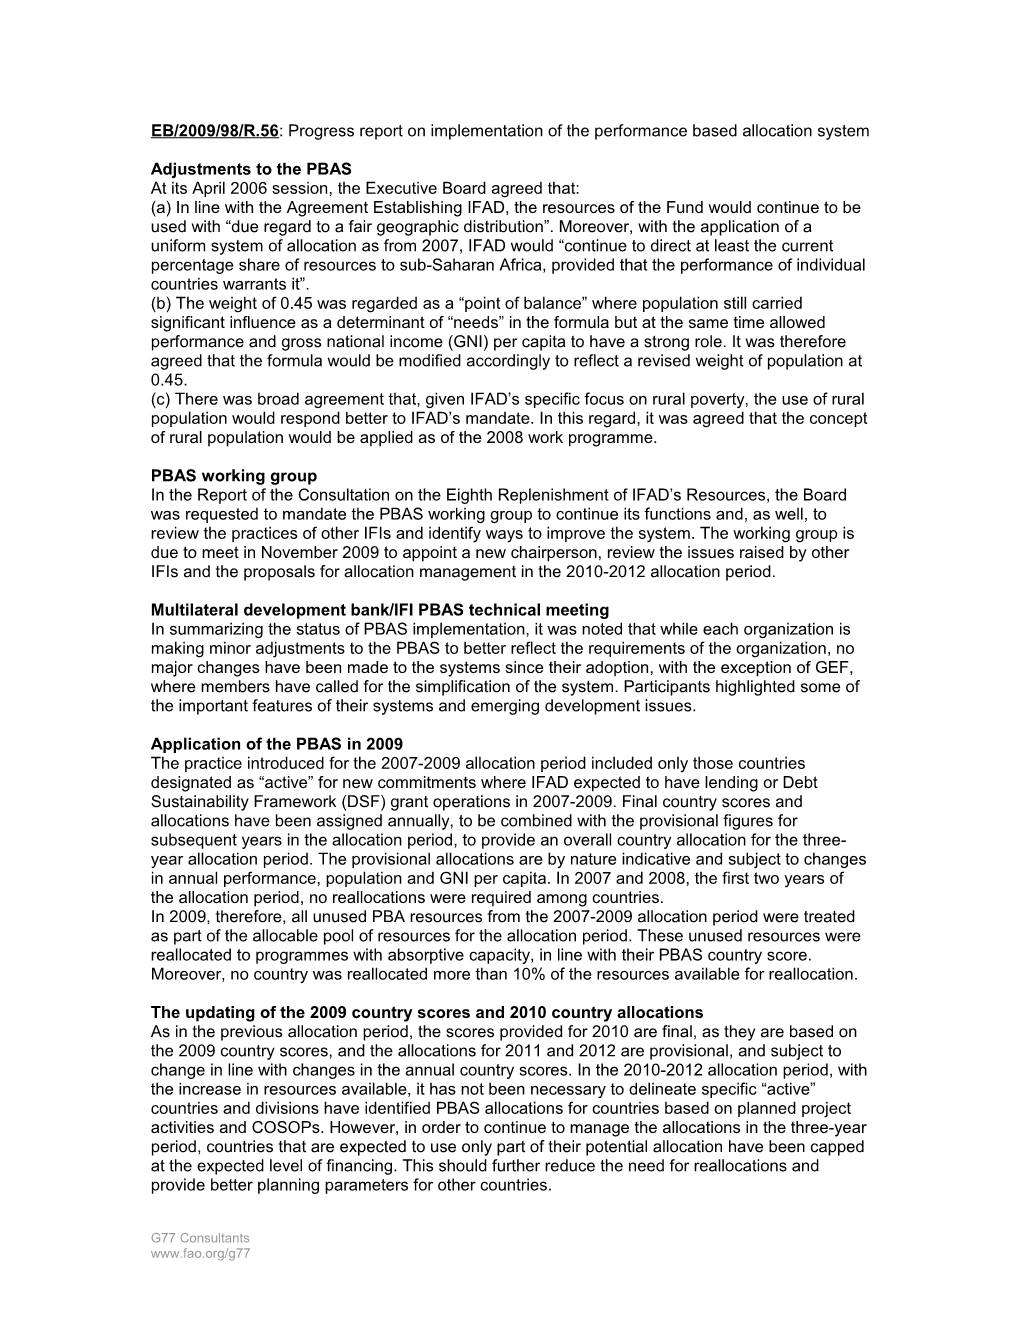 EB/2009/98/R.56: Progress Report on Implementation of the Performance Based Allocation System